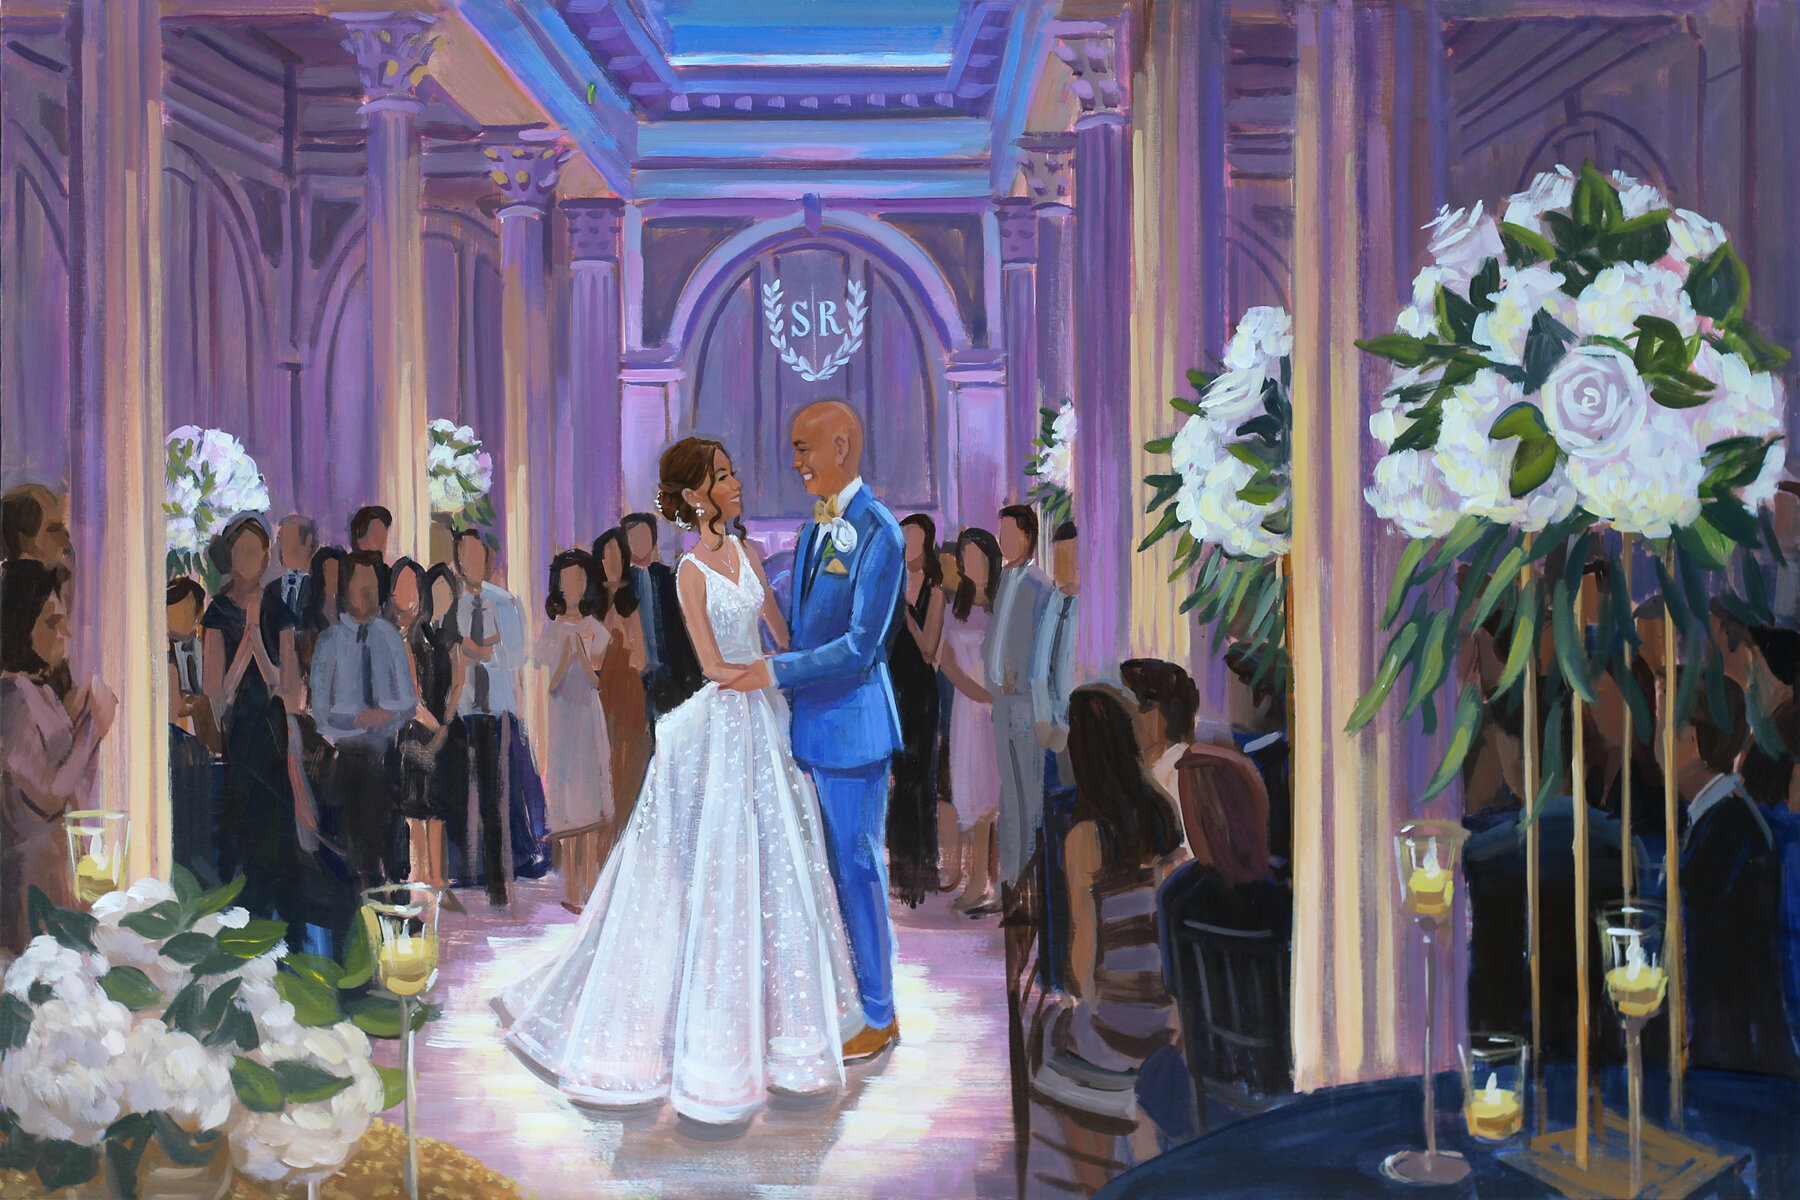 Live Wedding Painter, Ben Keys, captured Stephanie + Ryan’s first dance held at St. Augustine’s historic Treasury on the Plaza.